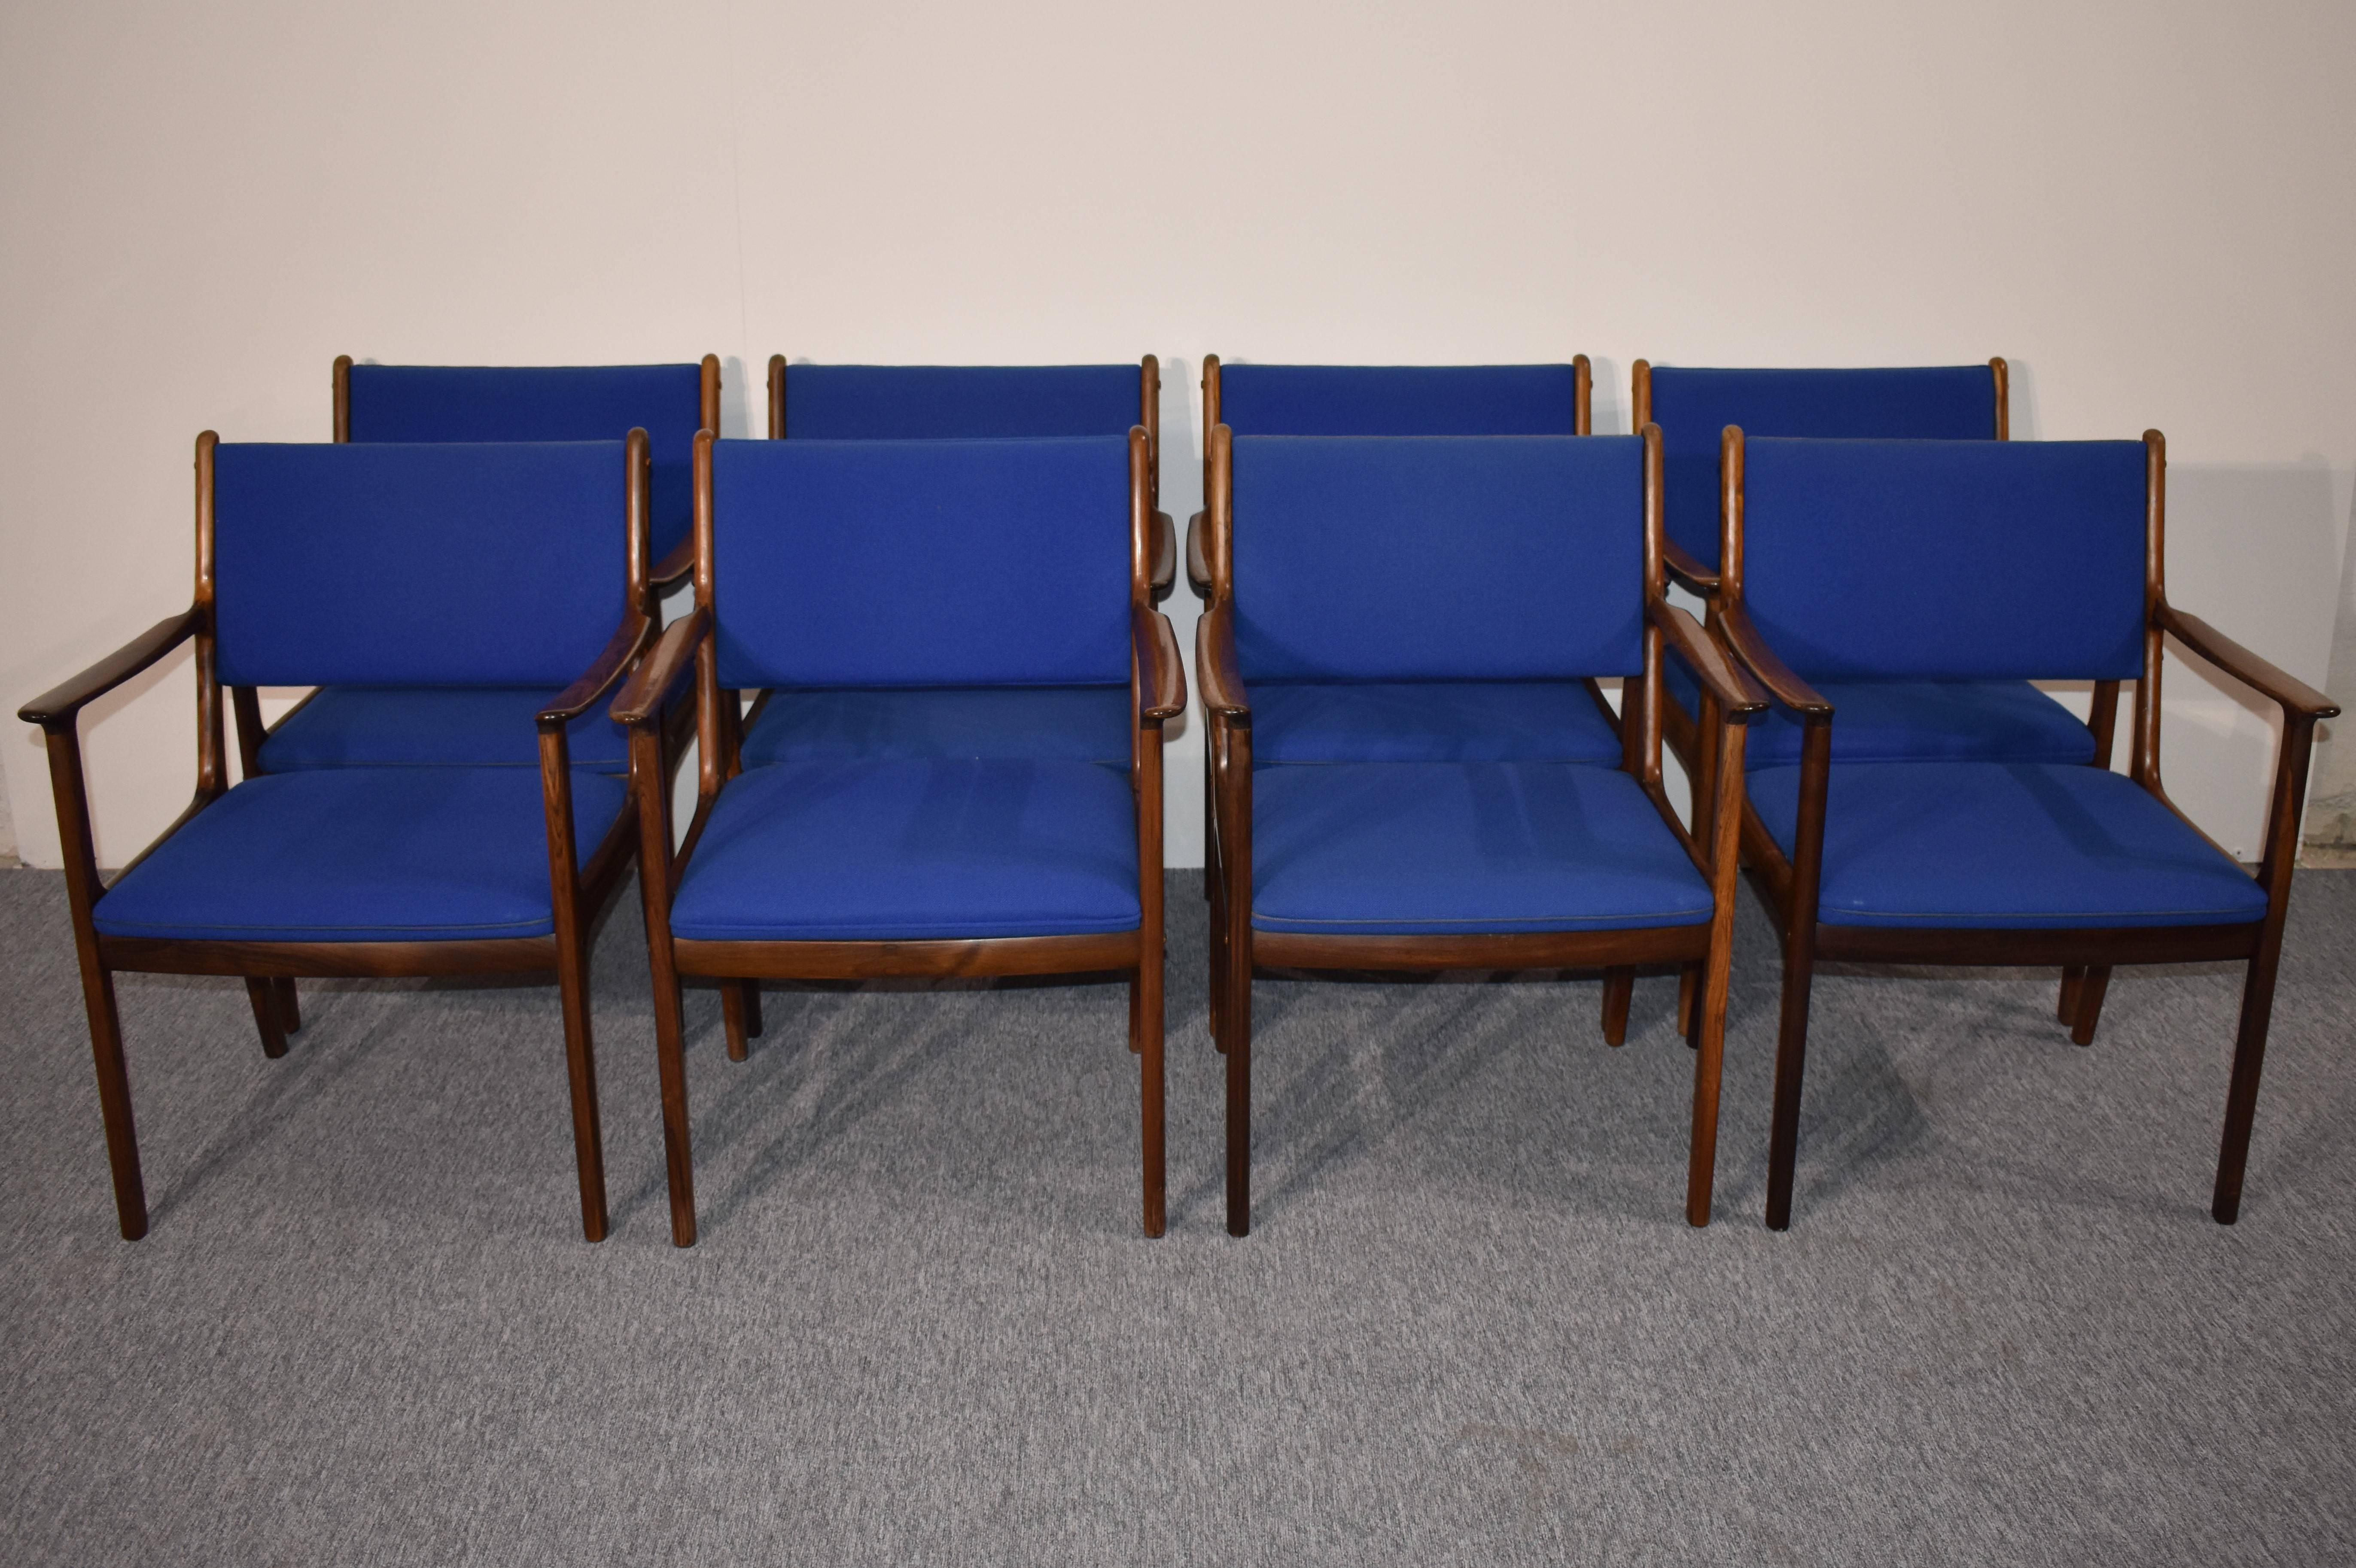 
Set of eight beautiful rare palisander armchairs, designed Danish furniture designer by Ole Wanscher for Poul Jeppesen. The chairs have blue upholstery. From 1950s.